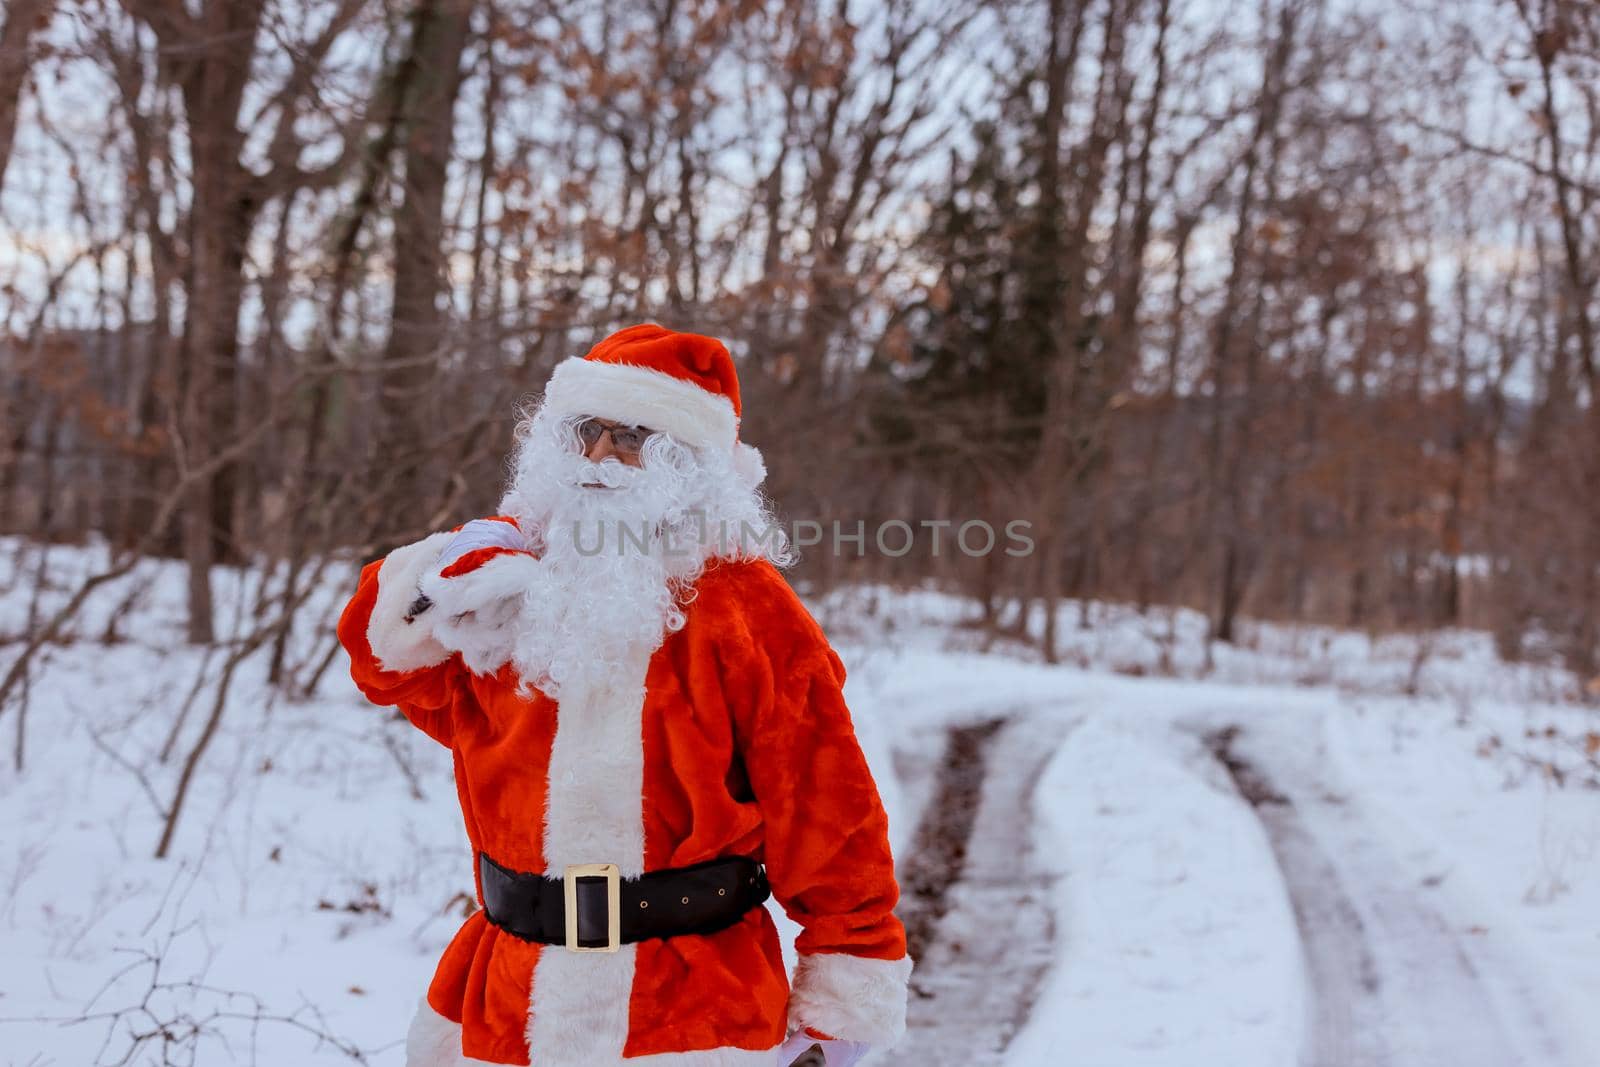 Santa Claus in the winter forest the carrying Merry Christmas present gifts for the new year by ungvar